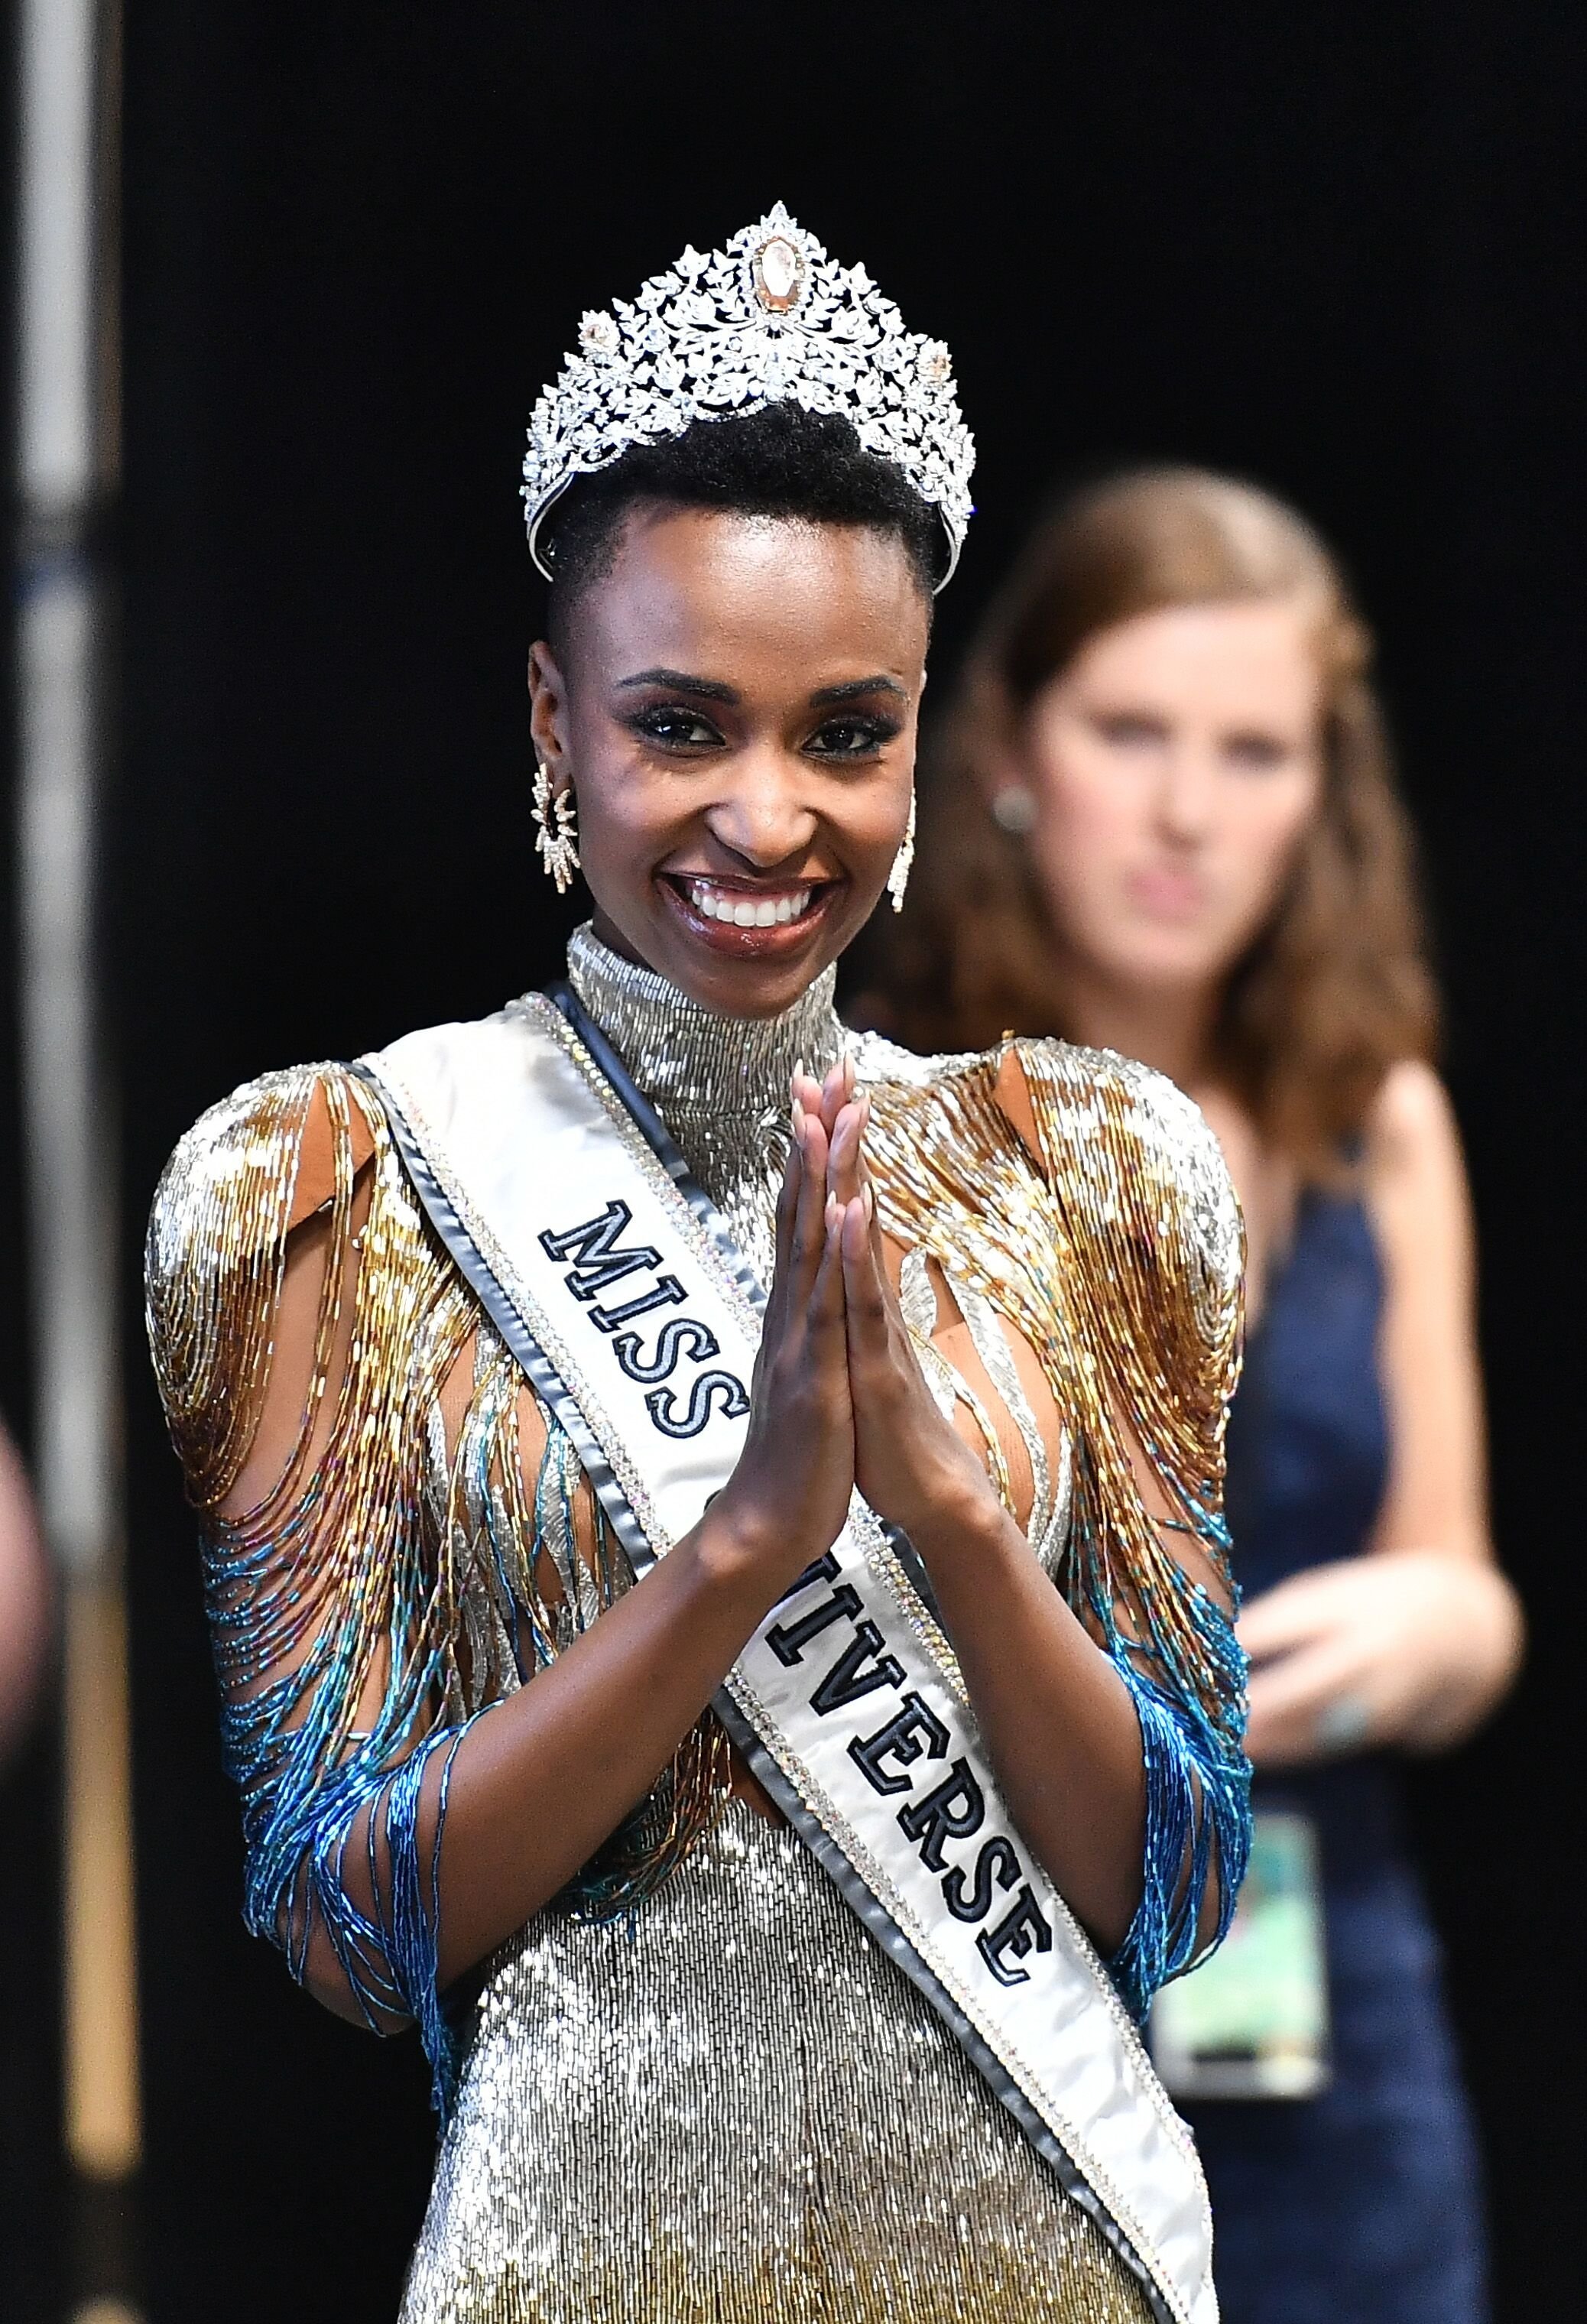 Zozibini Tunzi after being crowned Miss Universe 2019 | Source: Getty Images/GlobalImagesUkraine